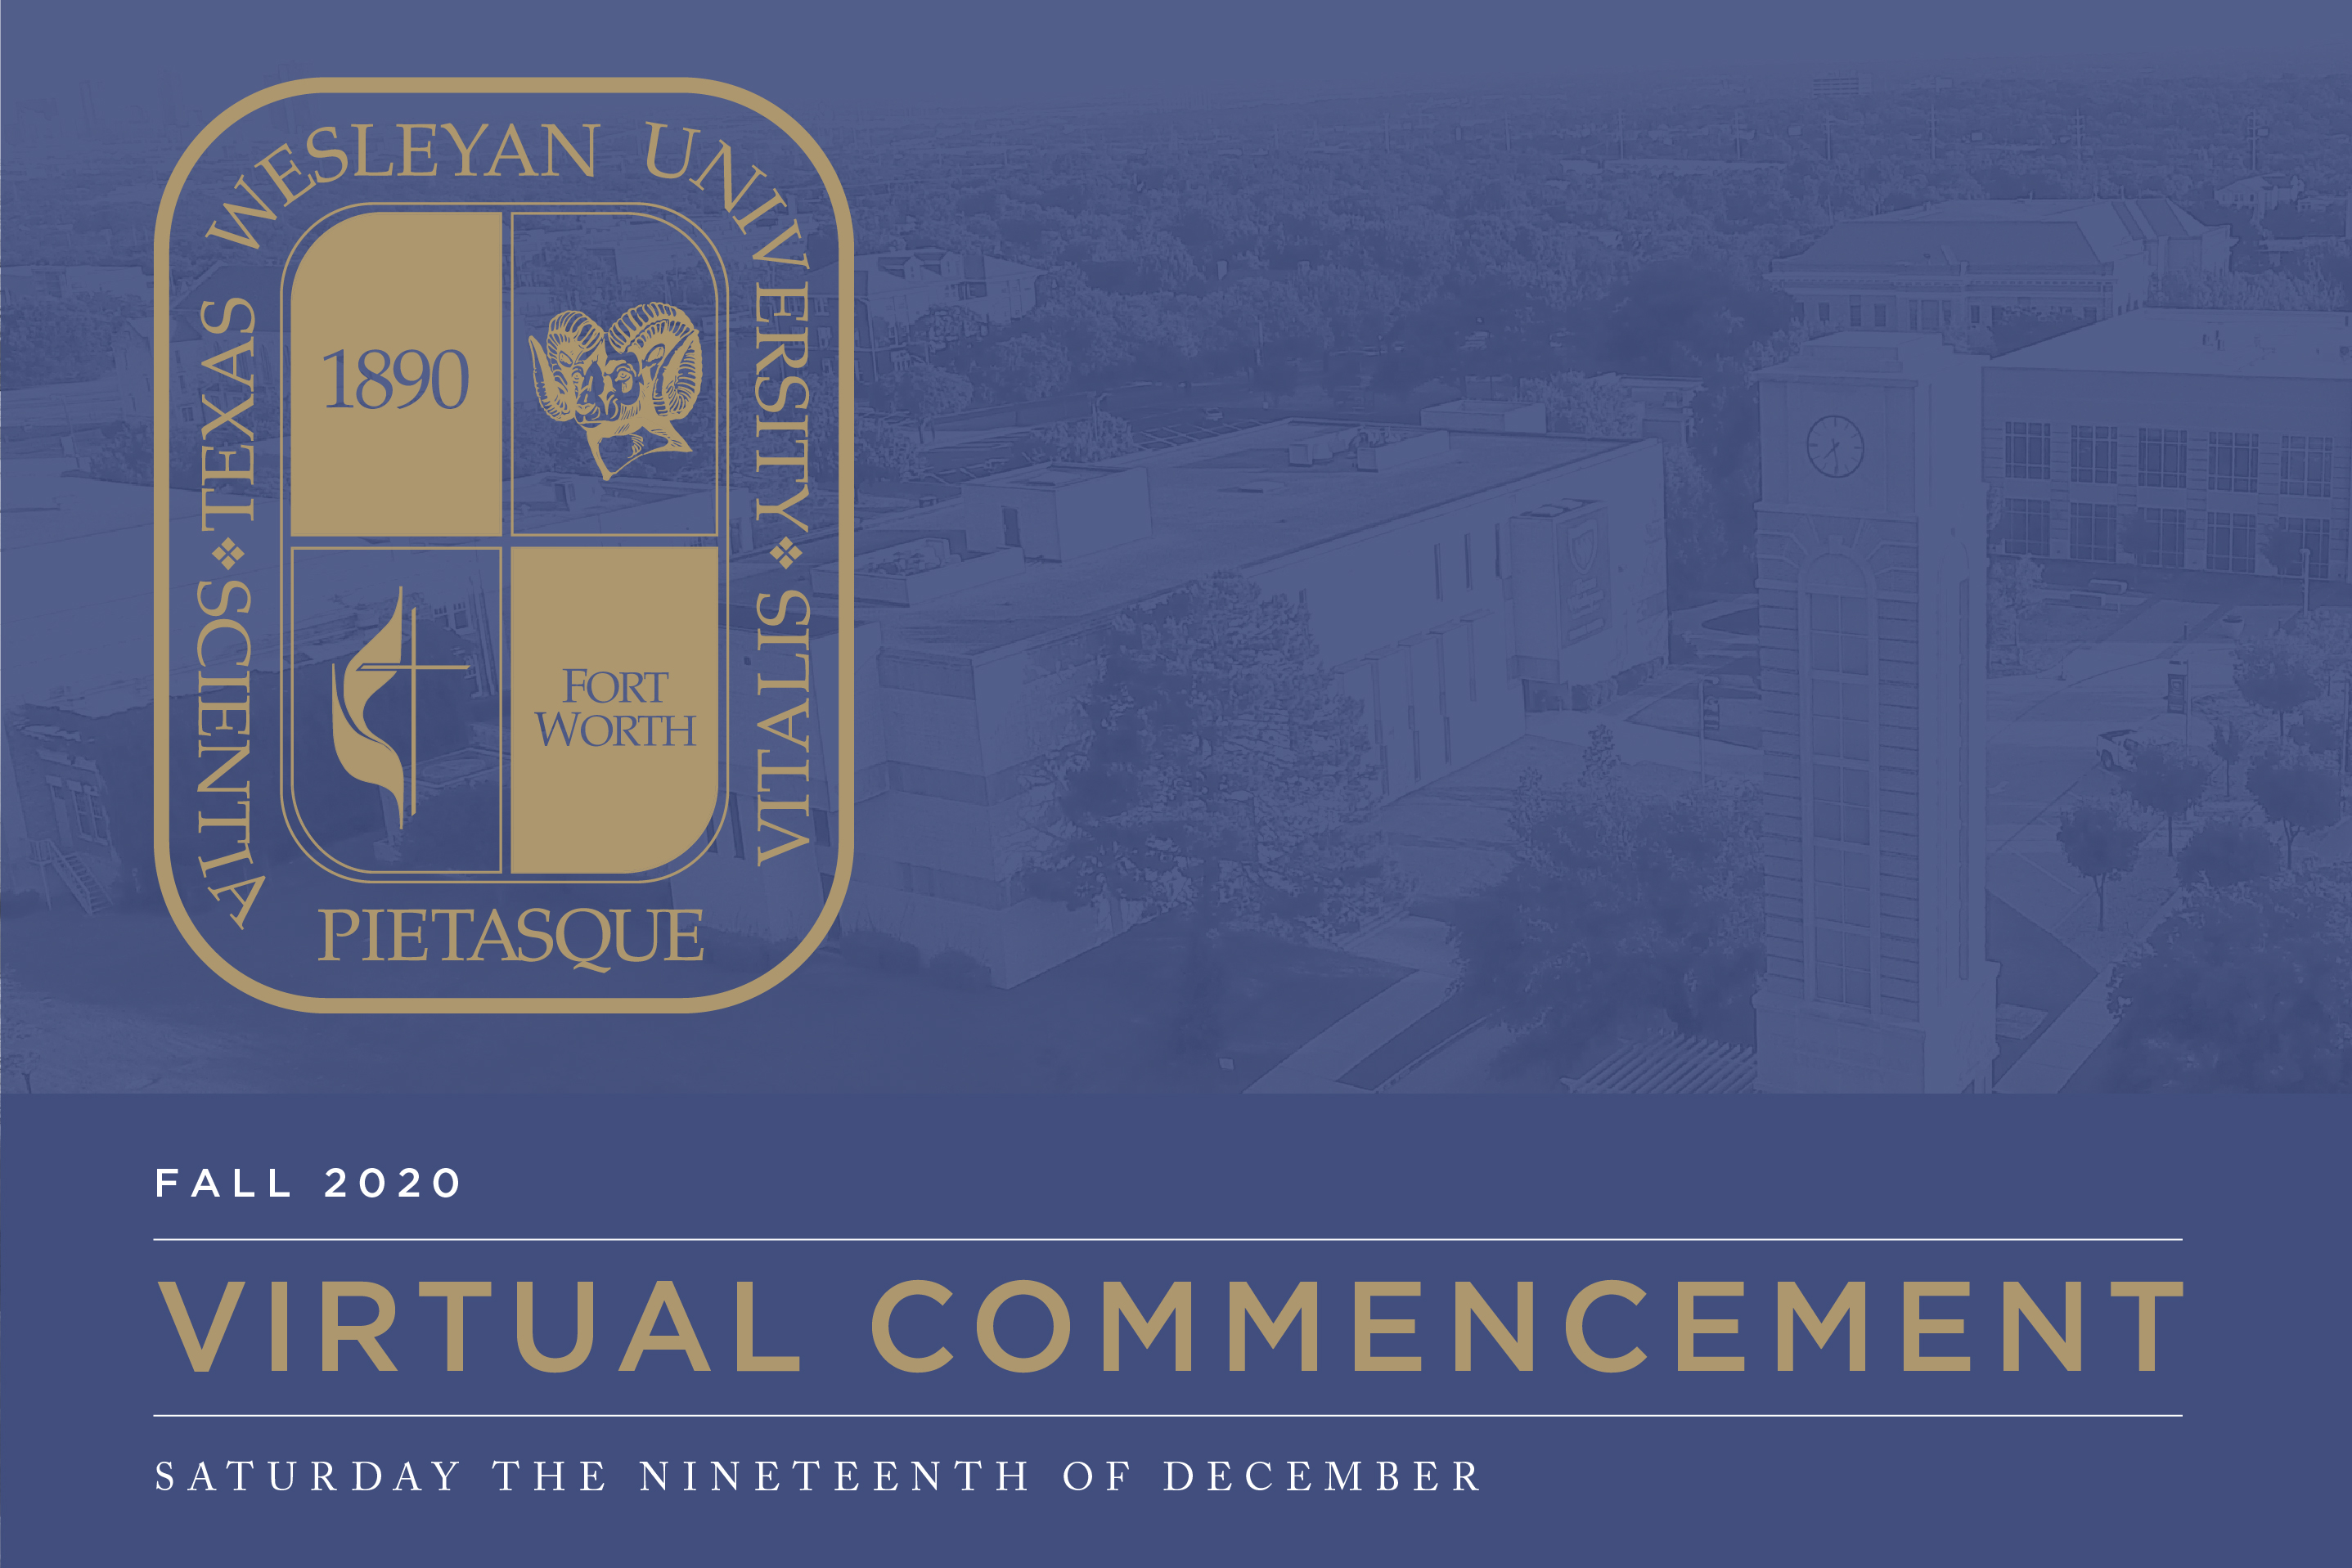 Virtual Commencement 2020, Saturday, December nineteenth at ten o'clock a.m. on YouTube premiere